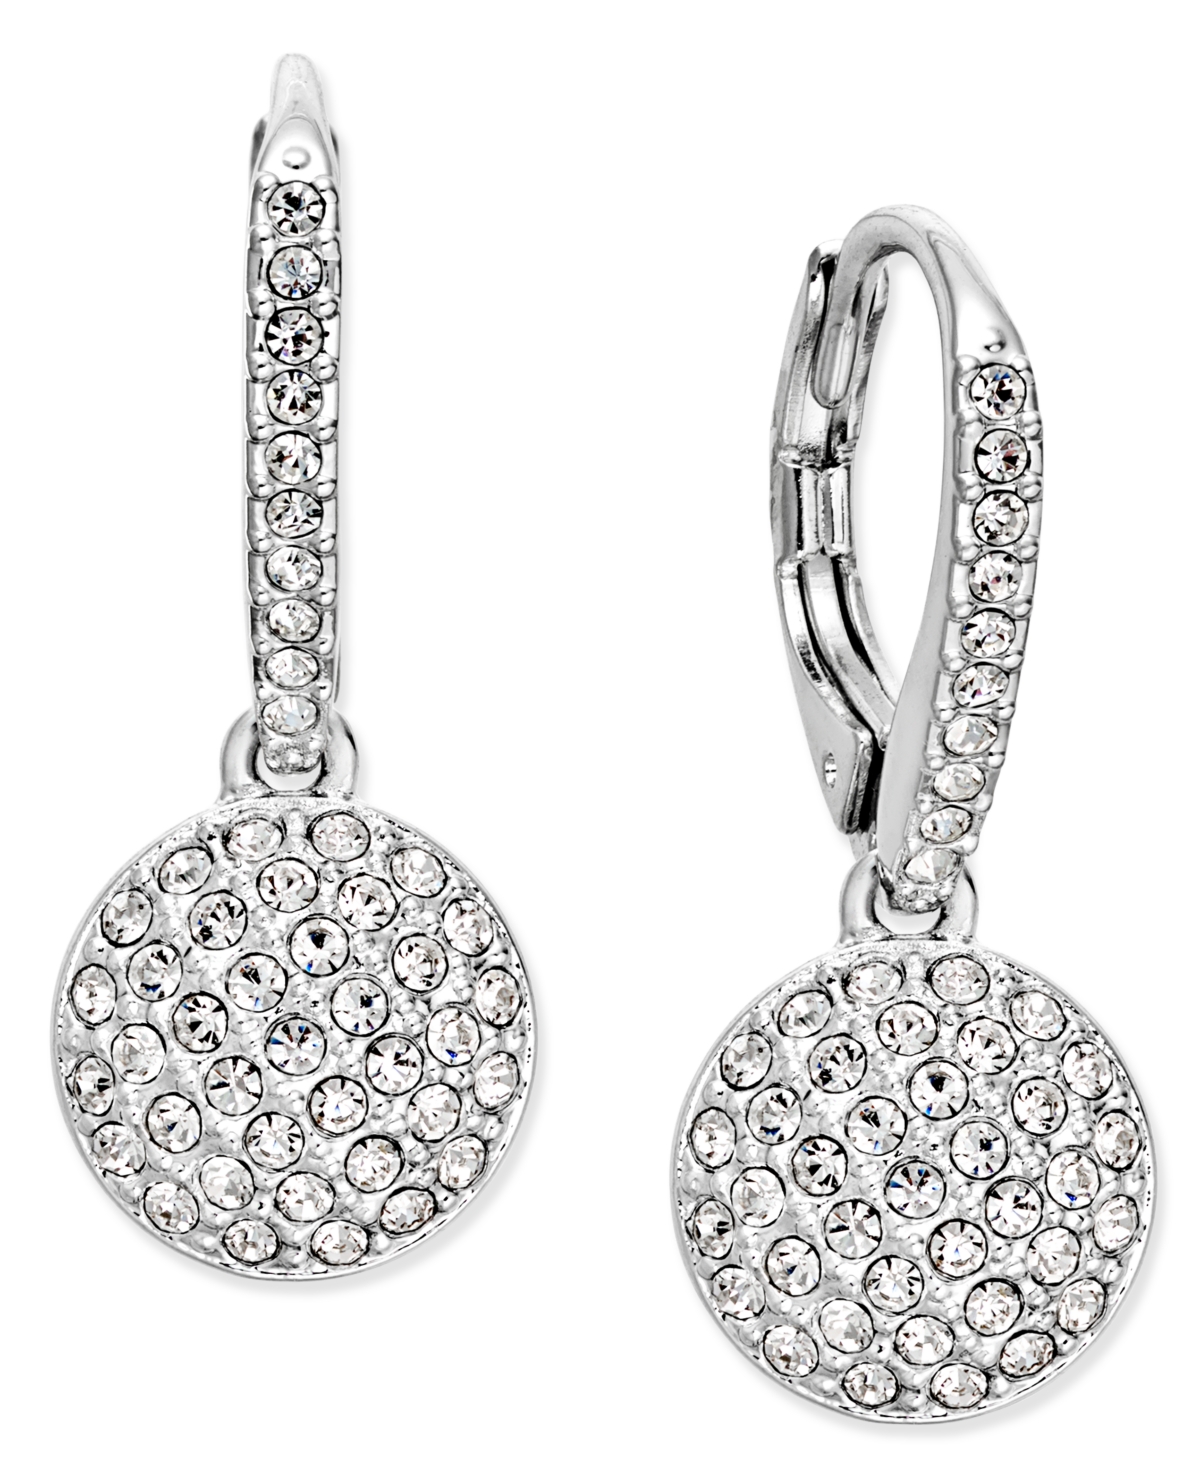 Rose Gold-Tone Pave Disc Drop Earrings, Created for Macy's - Gold